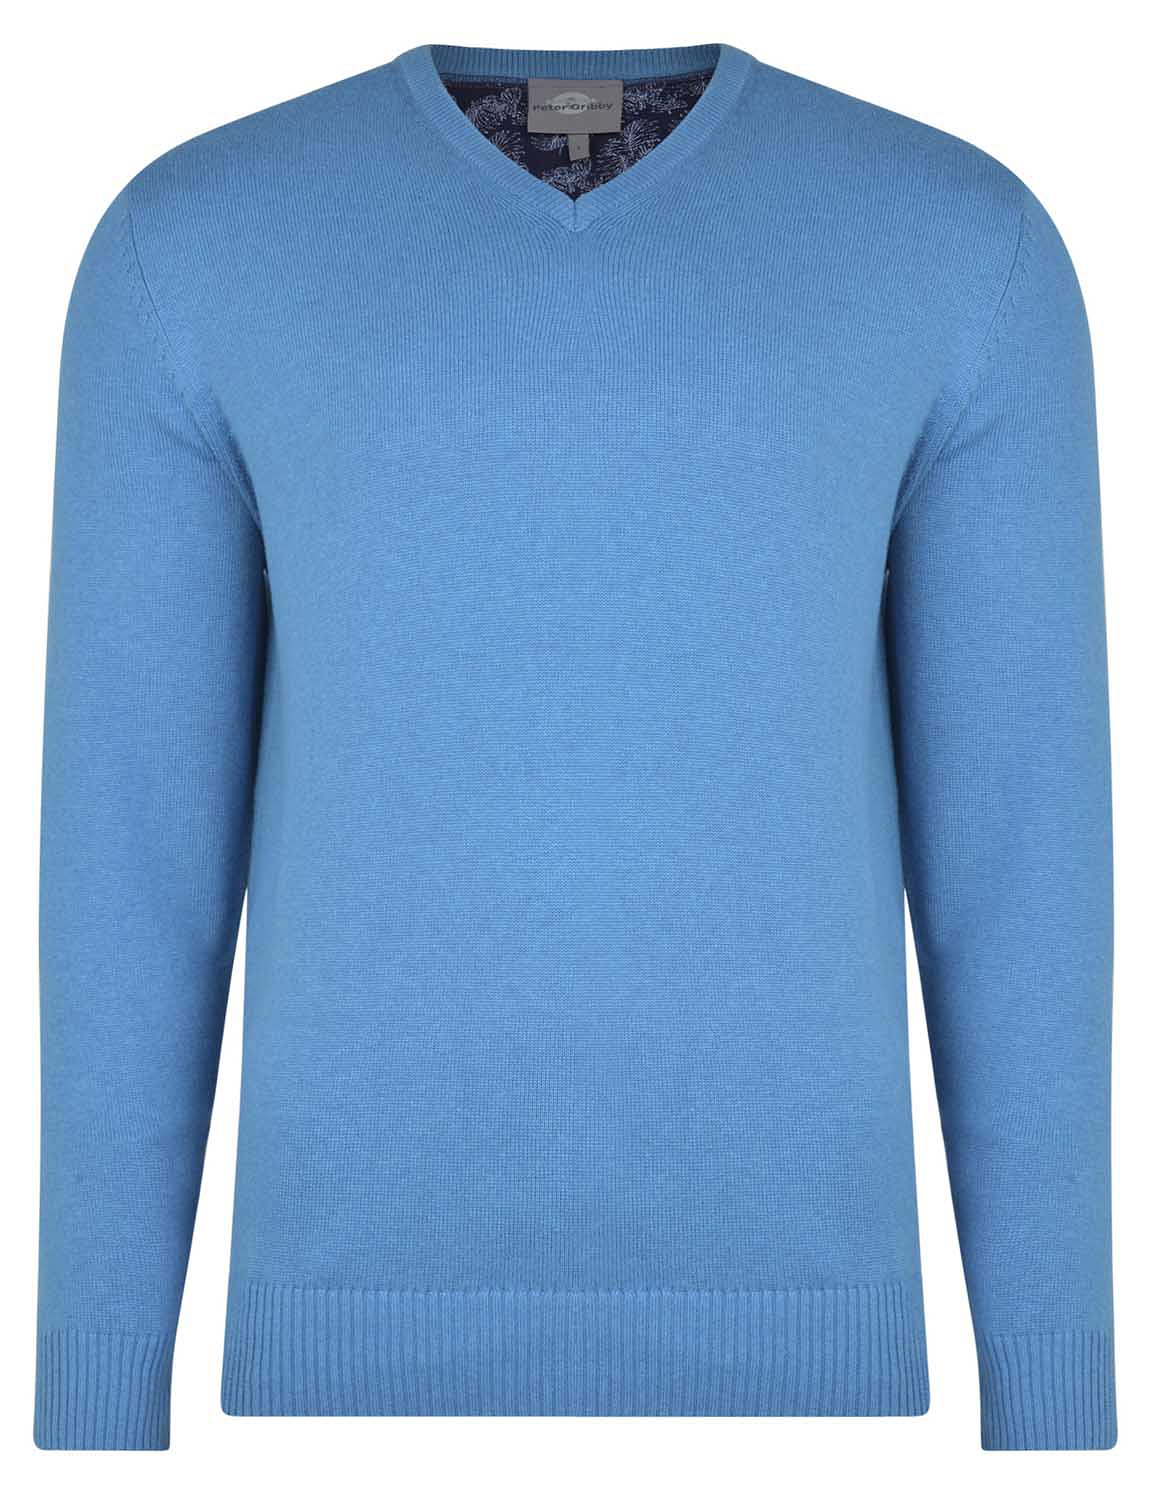 Peter Gribby Premium Combed Cotton V Neck Jumper | Chums